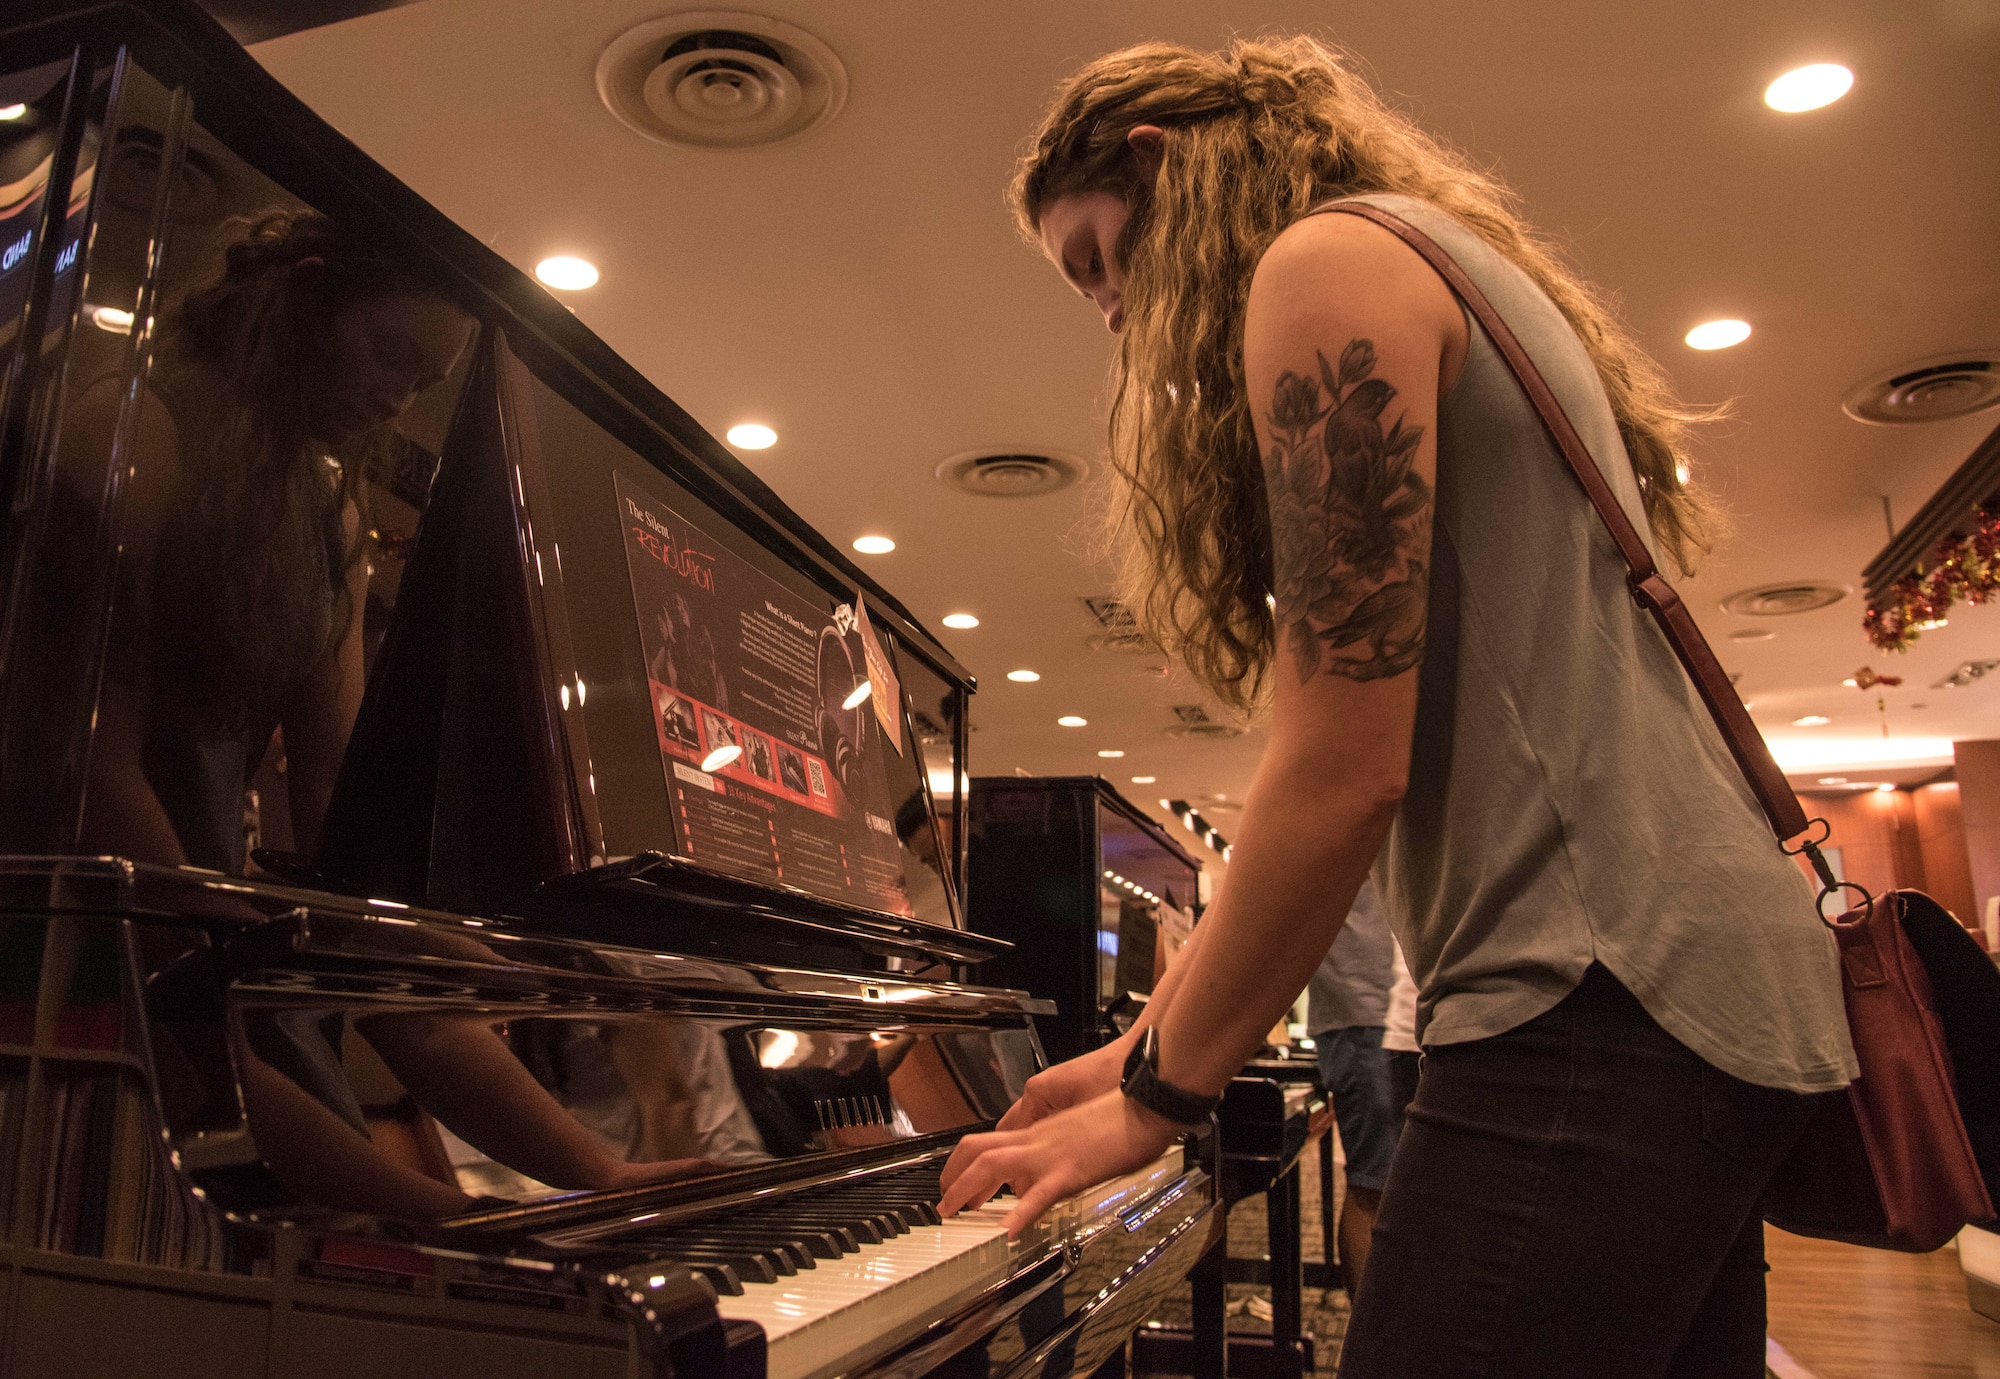 U.S. Air Force Senior Airman Emily Wall, a Pacific Air Forces' F-16 Demonstration Team crew chief, plays a piano at Changi, Singapore, Feb. 2, 2018. Wall enjoyed dabbling in many different hobbies growing up, piano being one of her favorites. Wall enlisted in the Air Force to try a more challenging path to facilitate character growth in her life. (U.S. Air Force photo by Senior Airman Sadie Colbert)